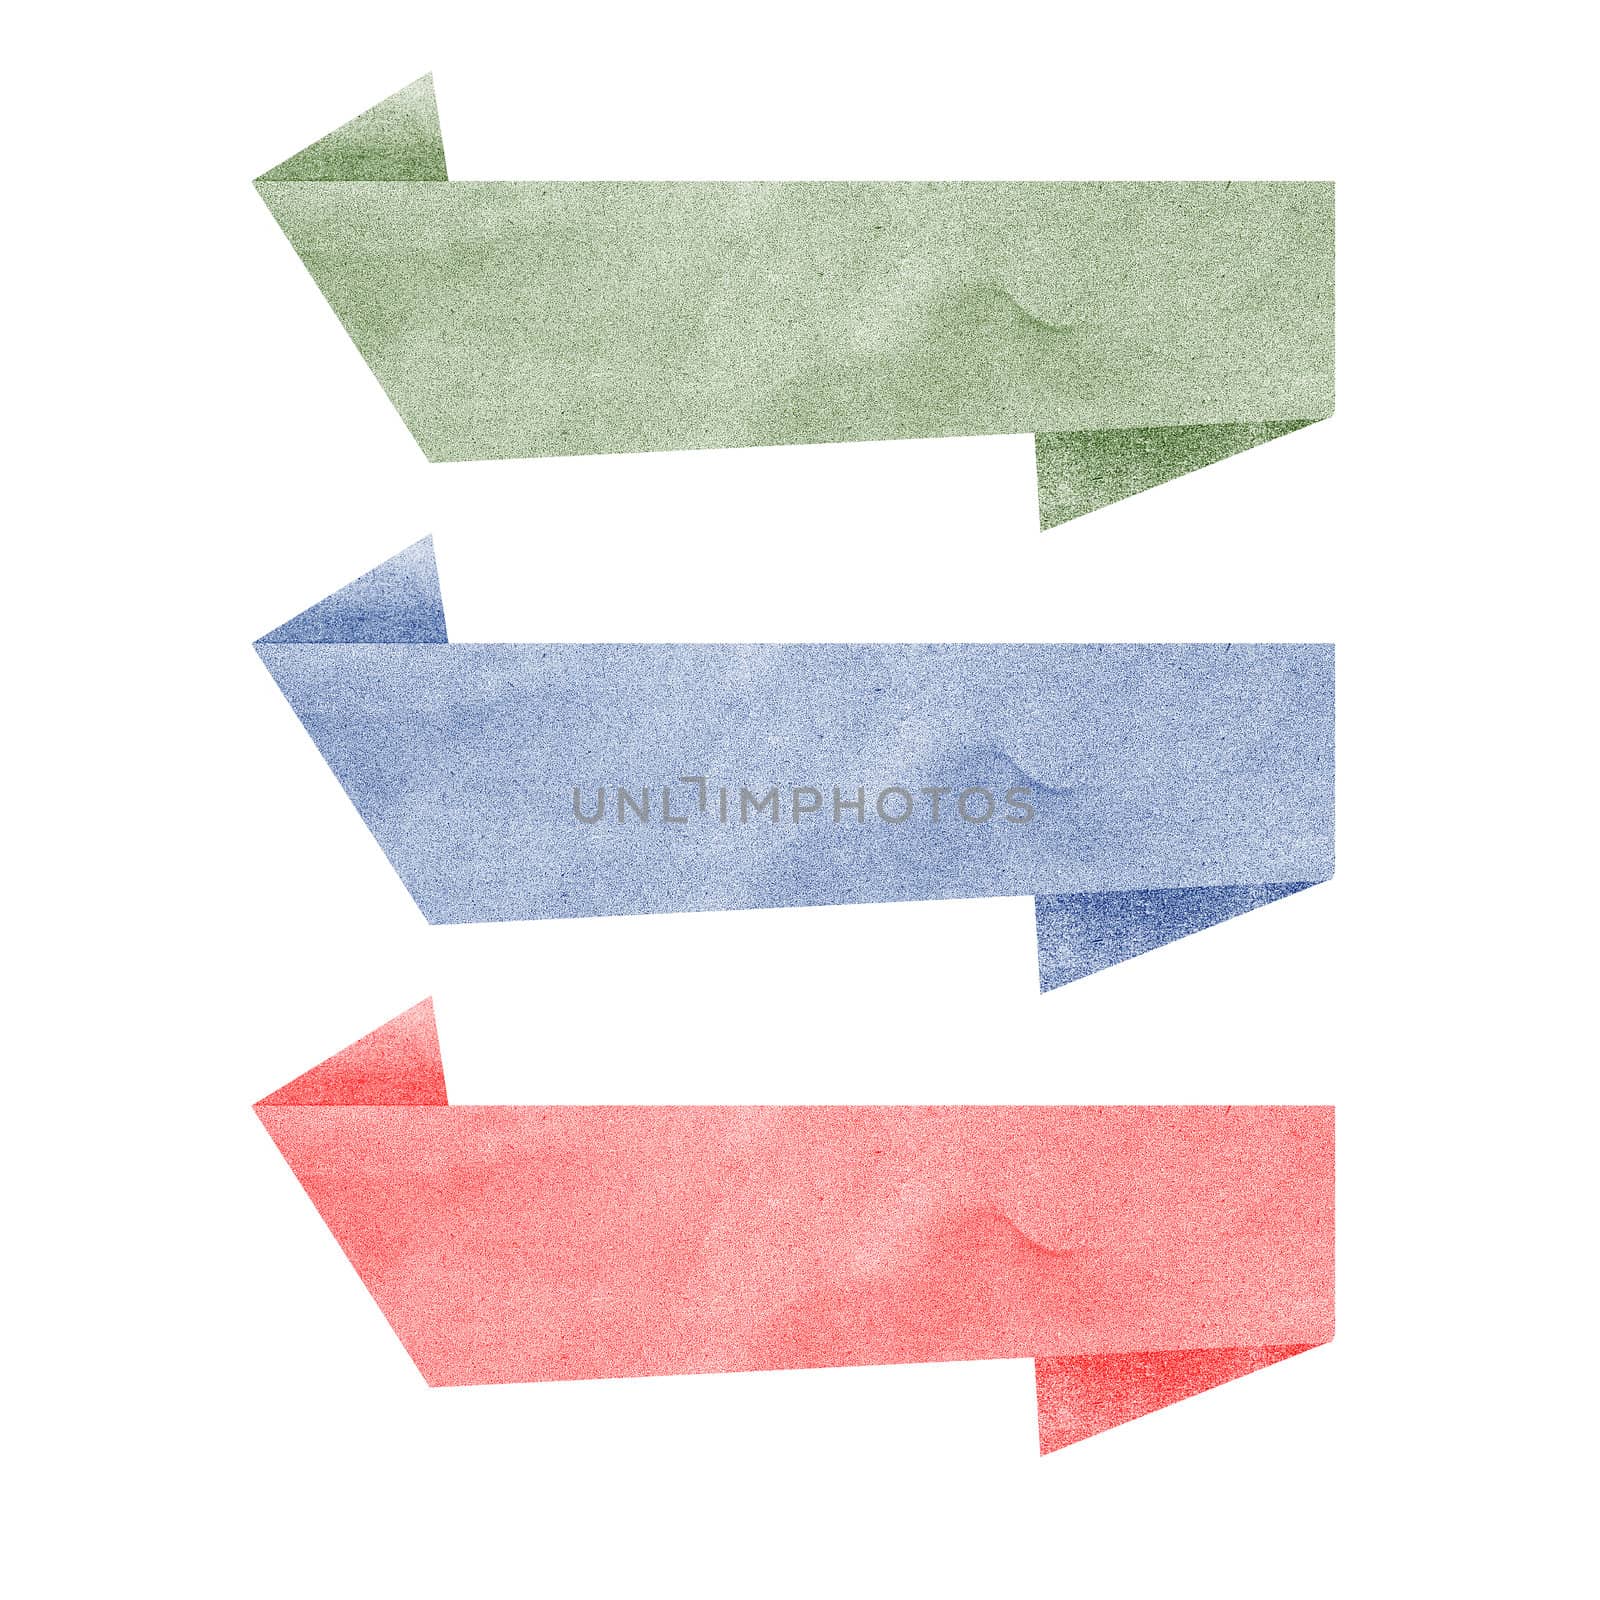 Paper texture ,Talk tag on white background by jakgree